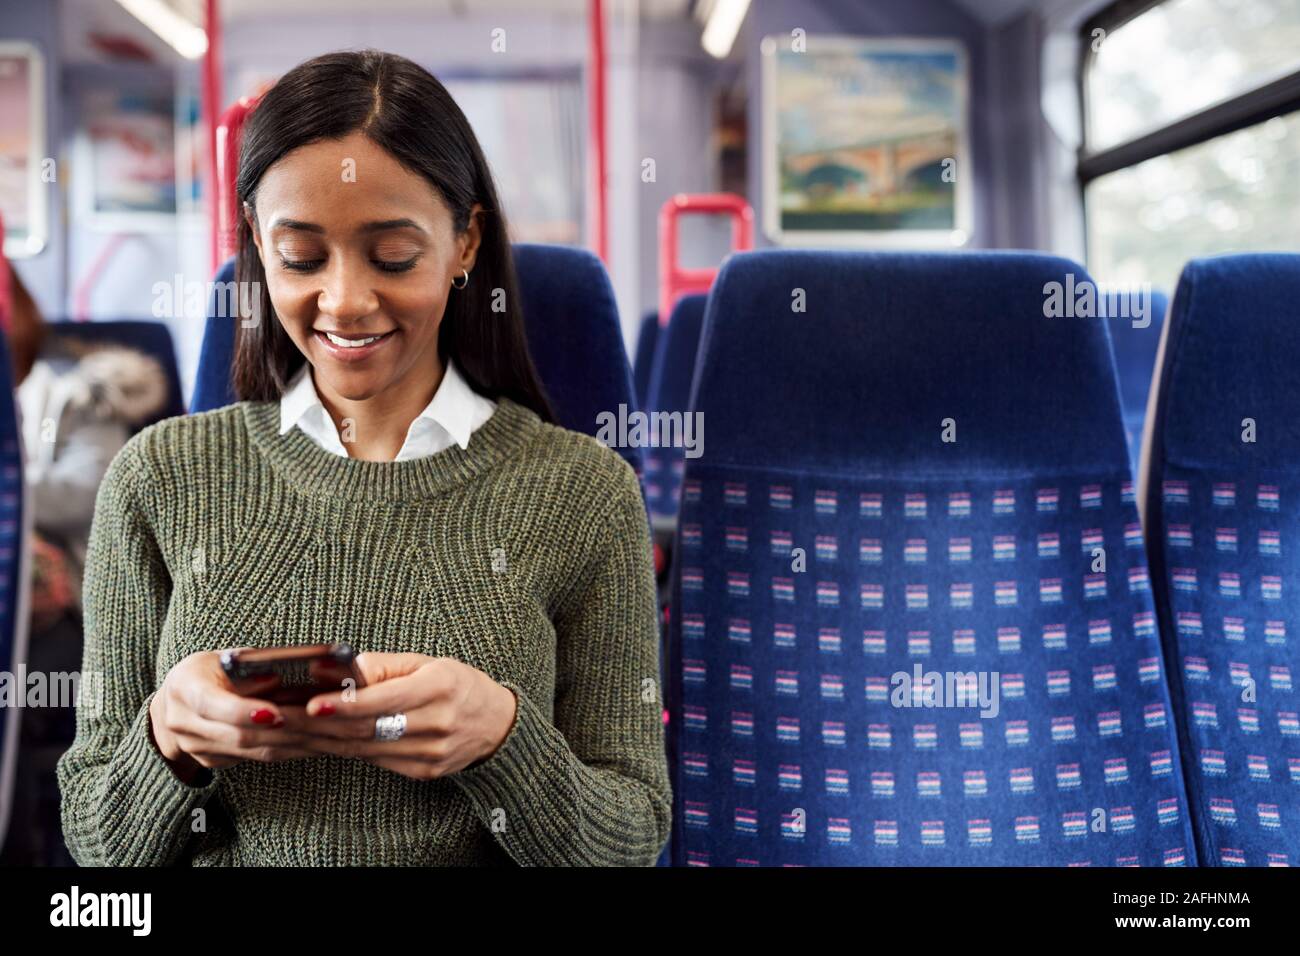 Female Passenger Sitting In Train Looking At Mobile Phone Stock Photo